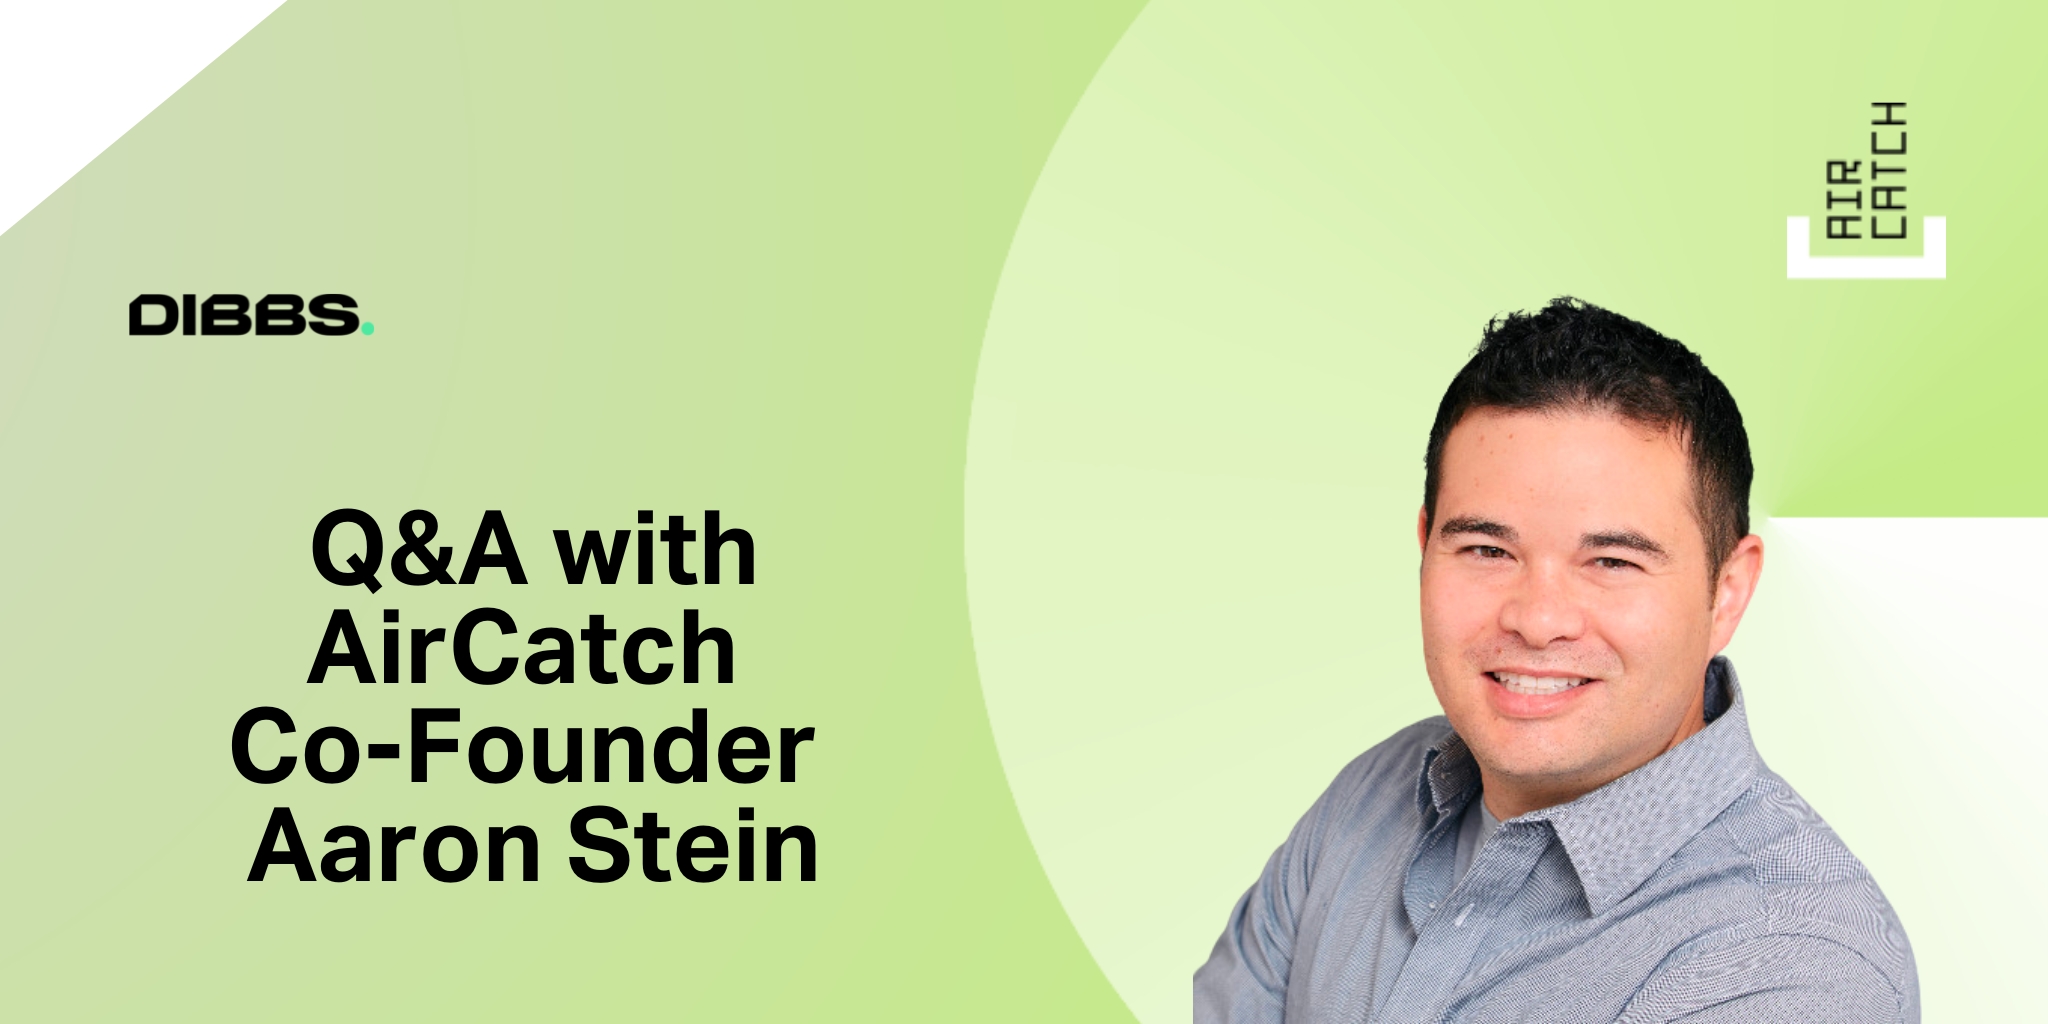 Q&A with AirCatch Co-Founder Aaron Stein on Web3, NFT & Blockchain Technology Utility